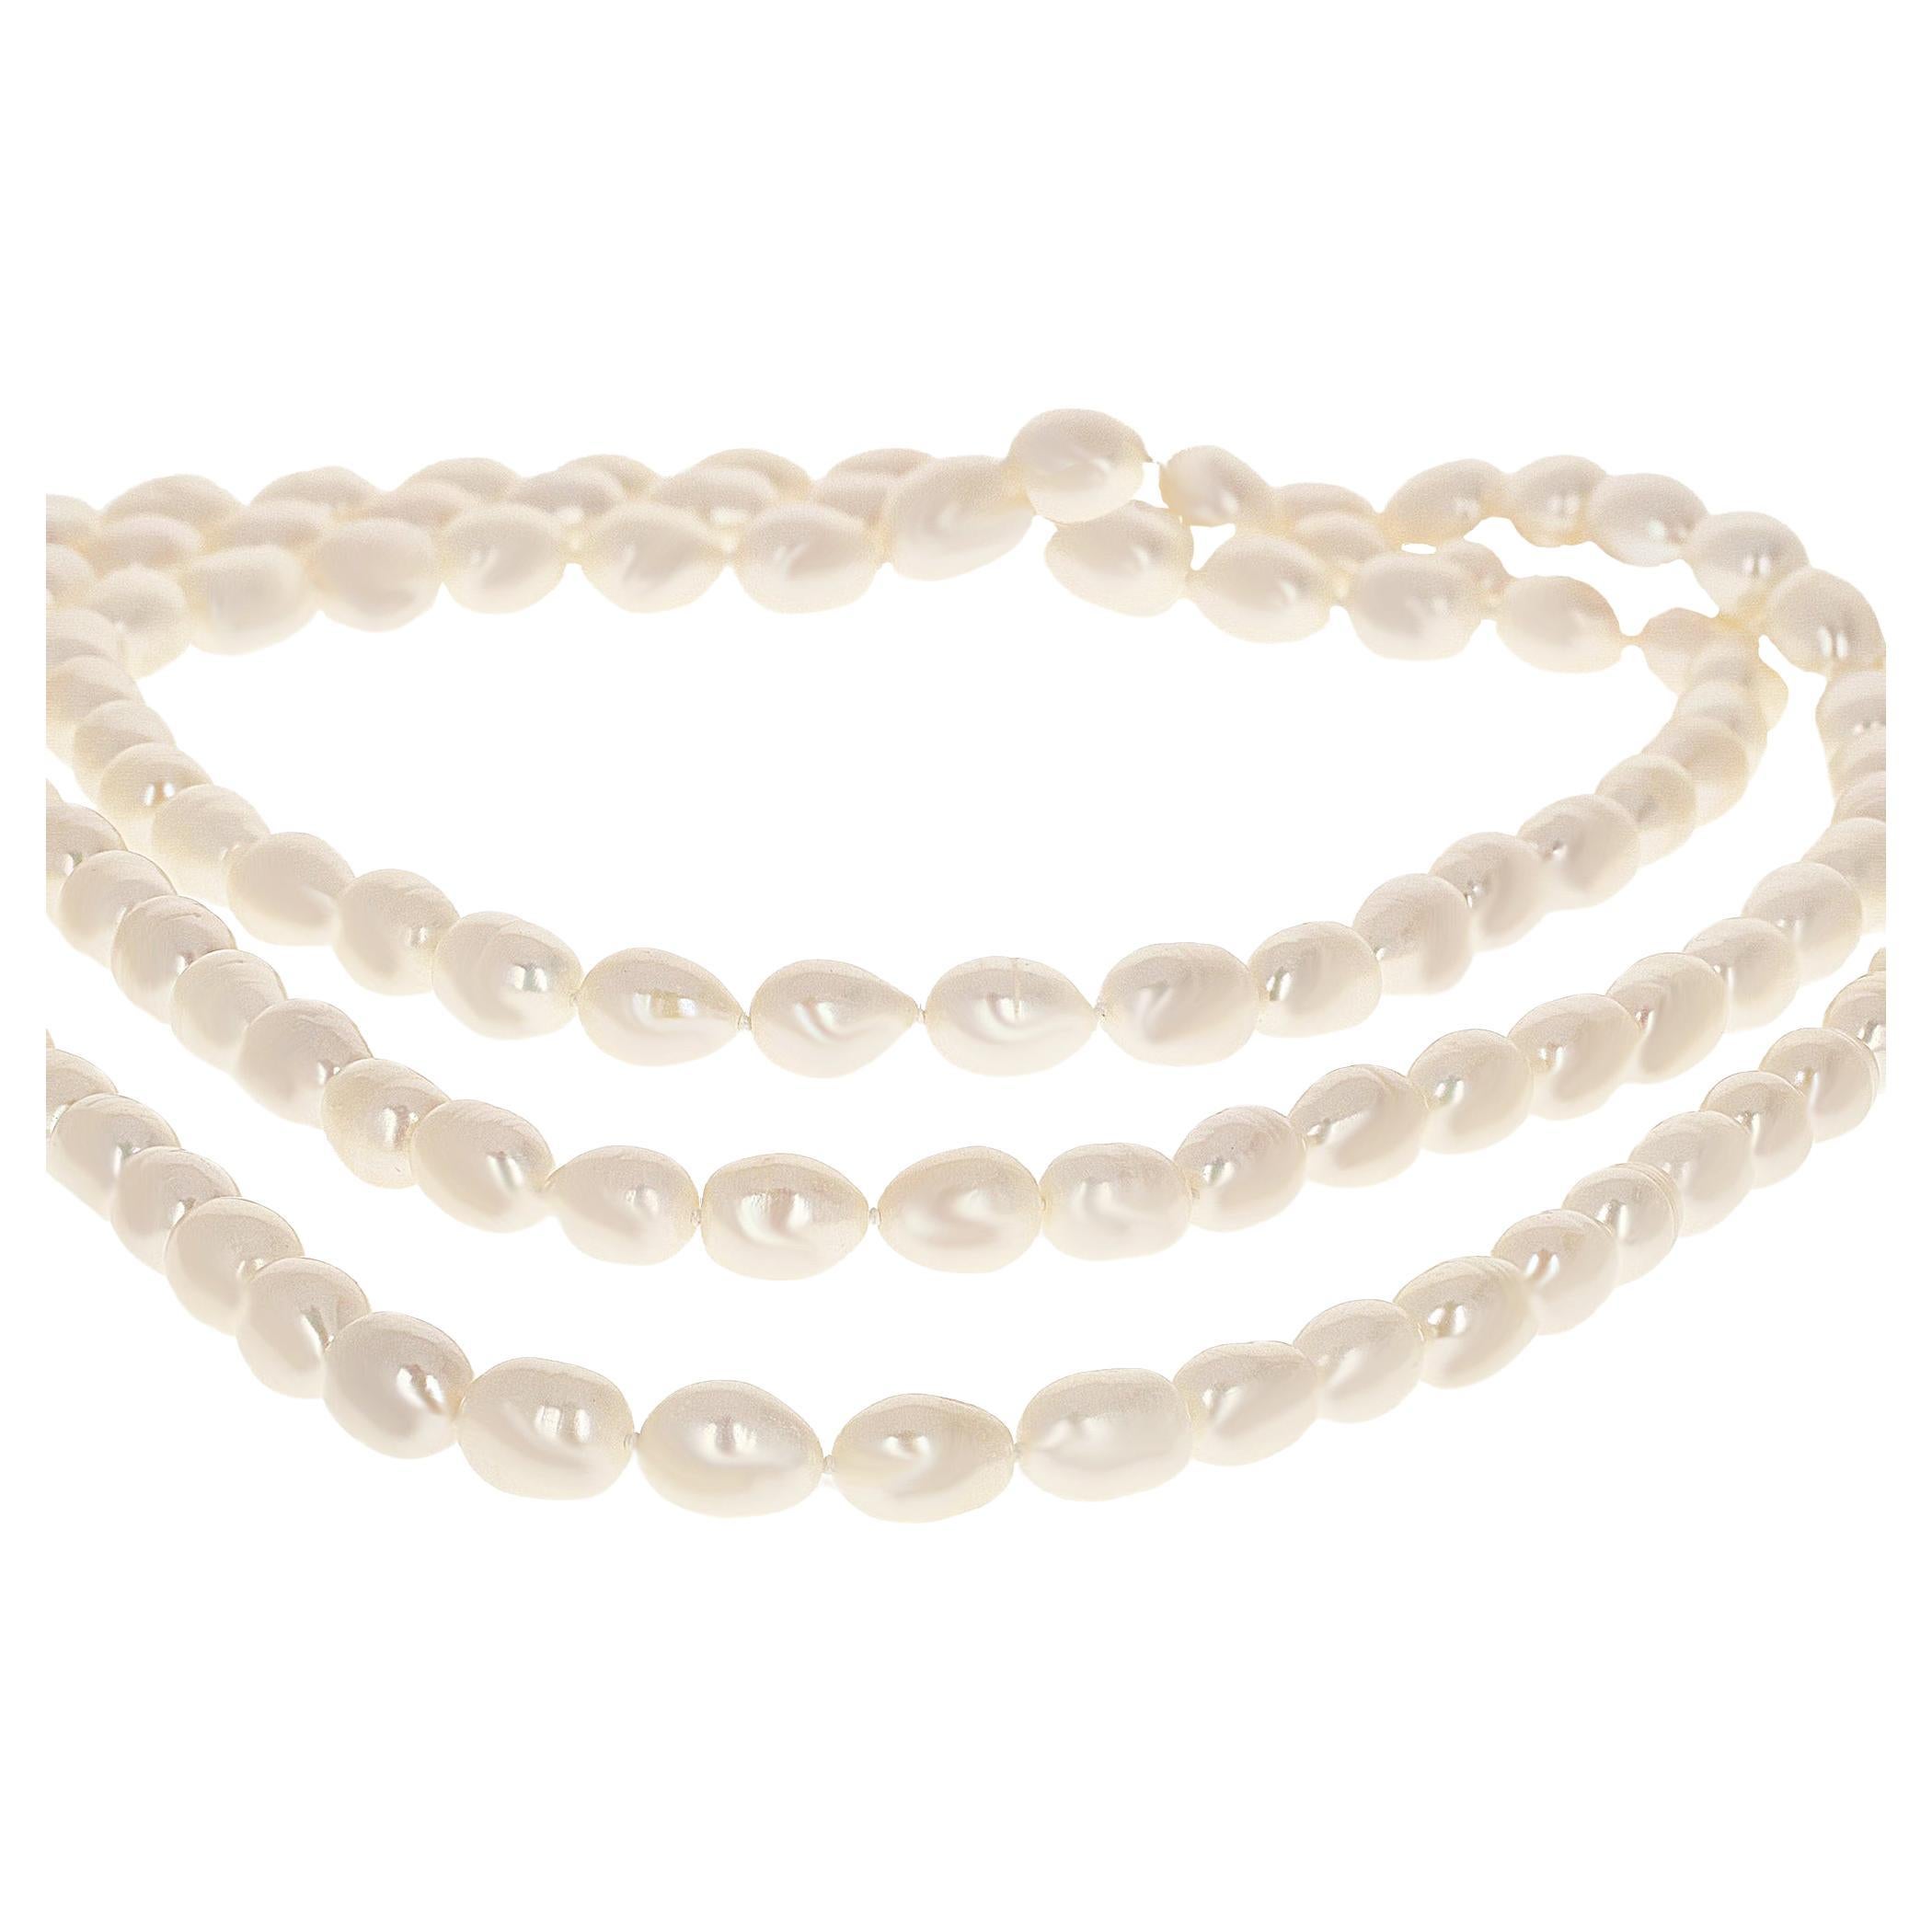 GIA certified, natural freshwater cultured pearls. The strand of pearls is 60 inches long, equal to four single strands.  These stunning pearls measure in size from 12 mm to 15.5 mm. 
Freshwater pearls are unique in size, shape, and color.